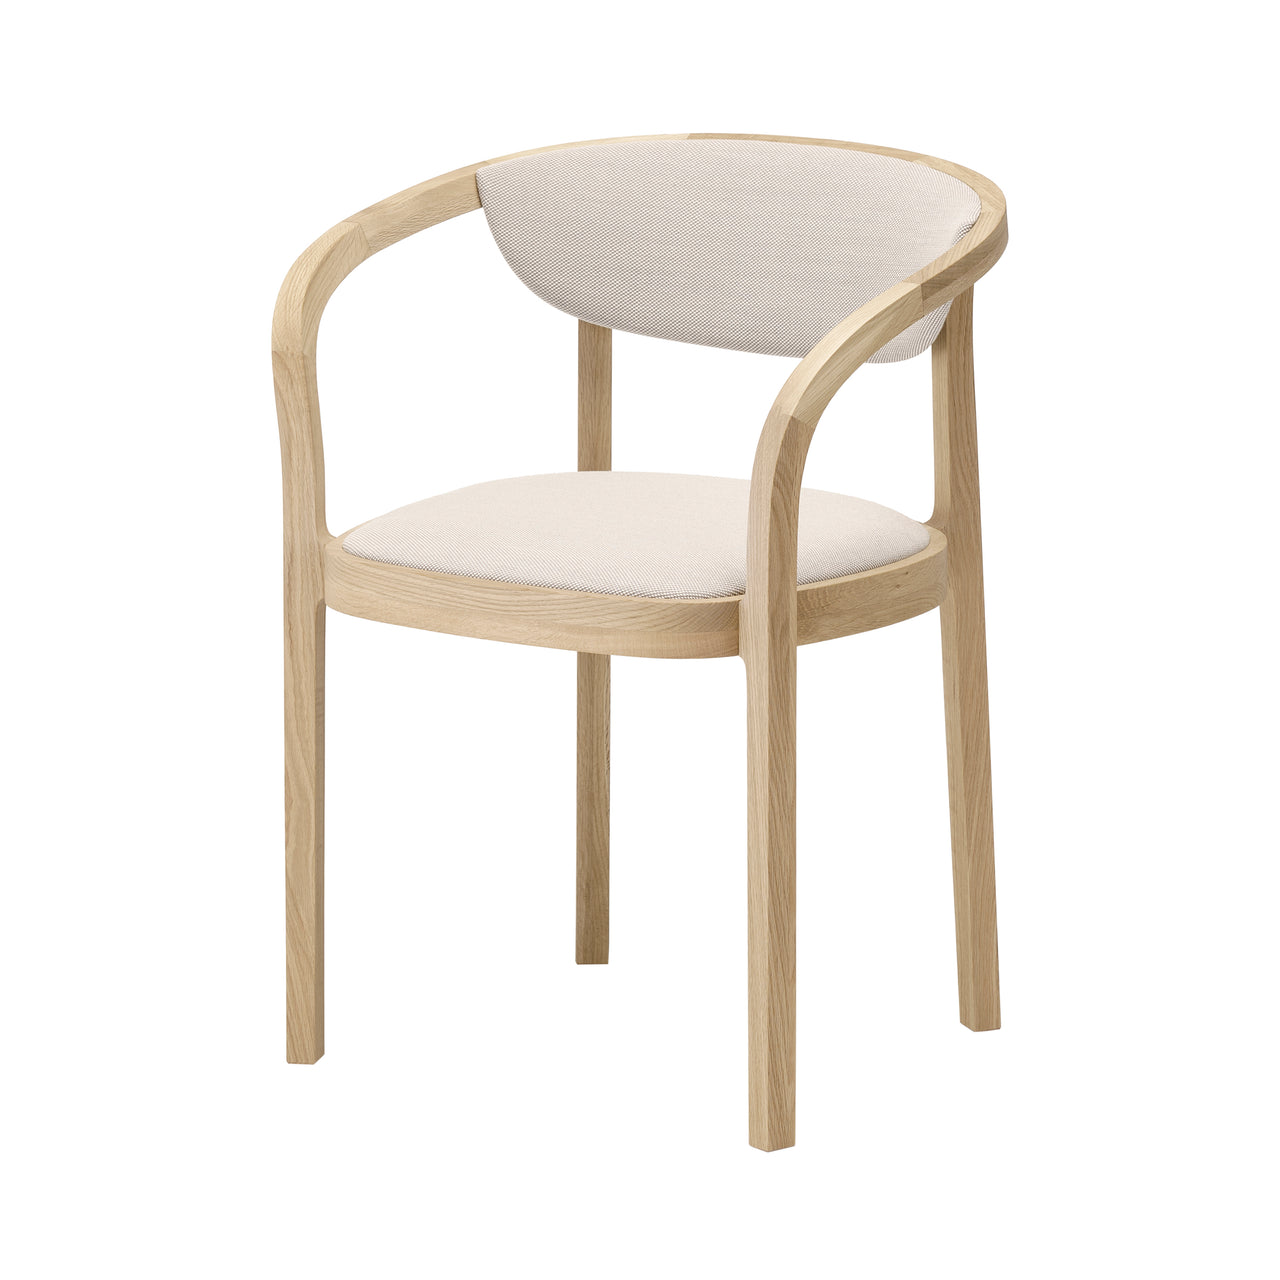 Chesa Chair with Pad: Pure Oak